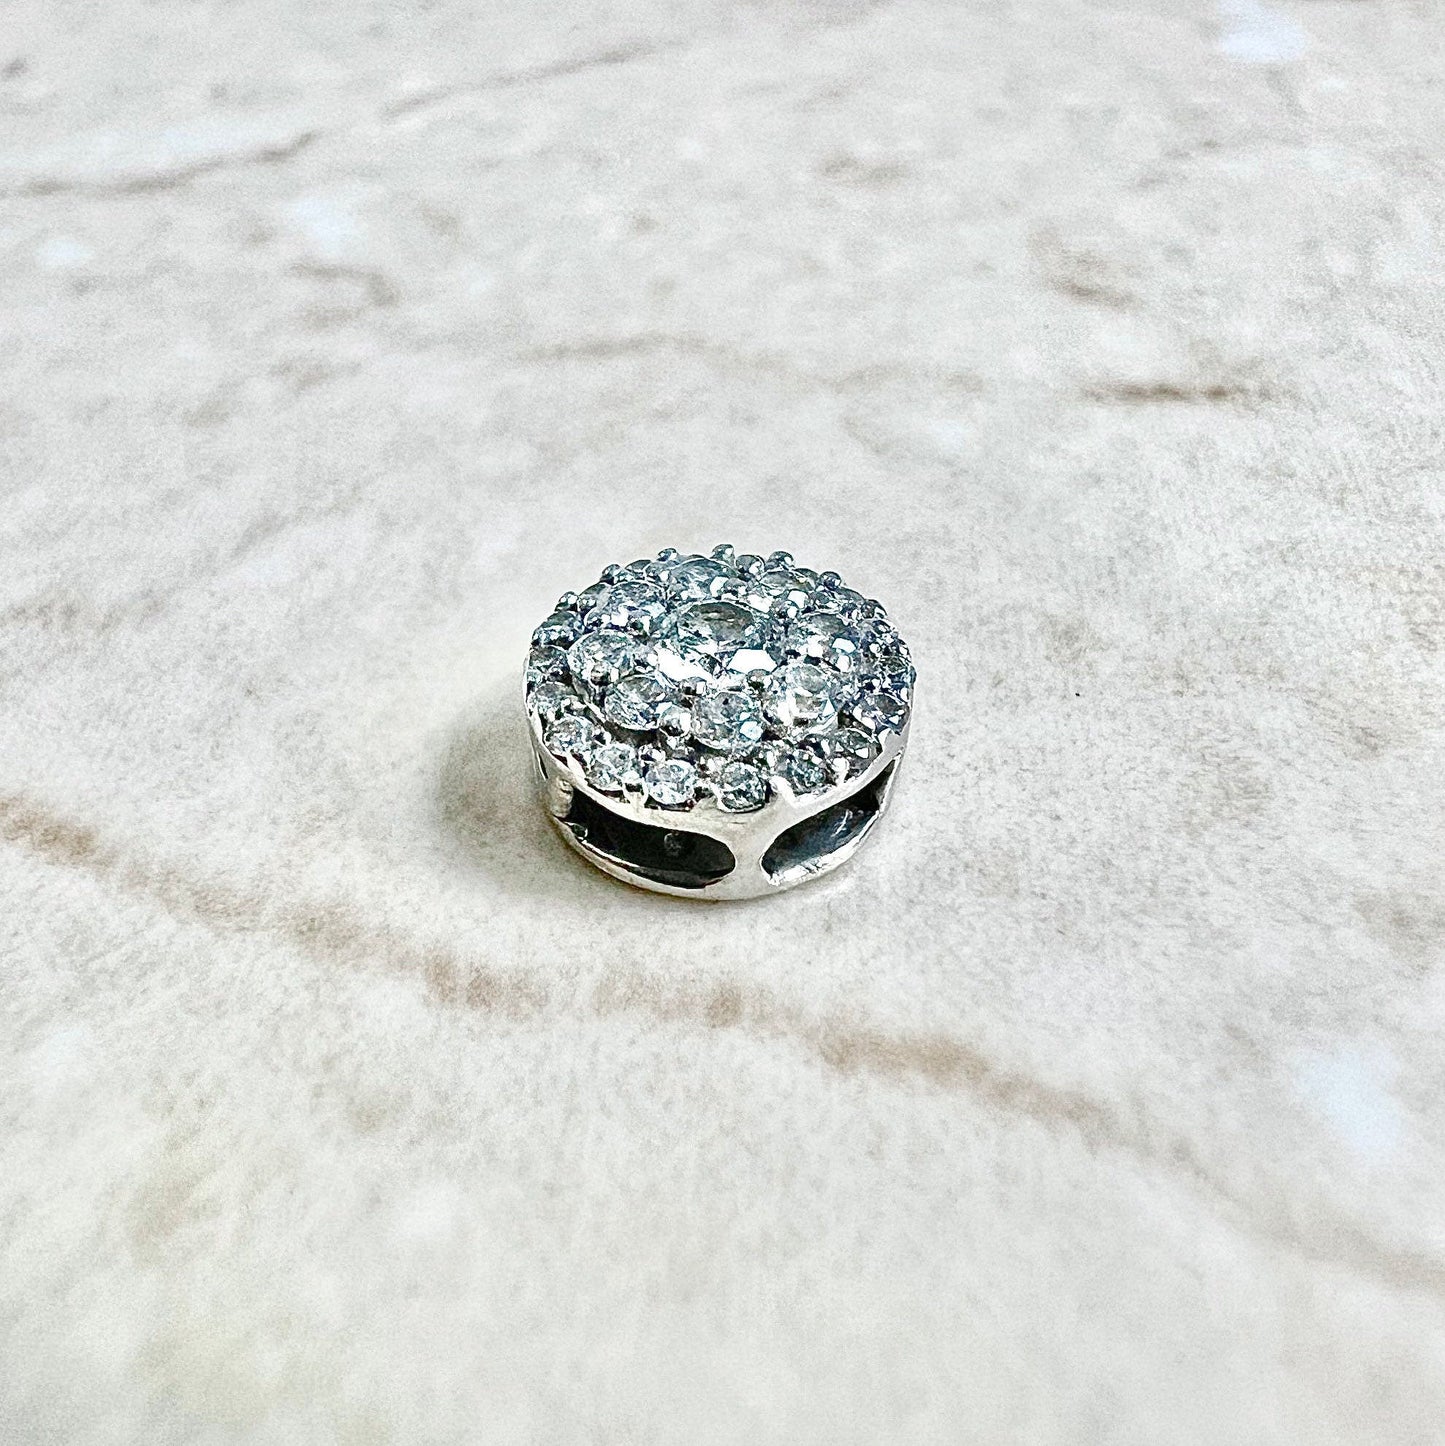 10K Diamond Halo Pendant Necklace - 10 Karat White Gold Diamond Pendant - Diamond Slide Pendant - Diamond Necklace - Best Gifts For Her